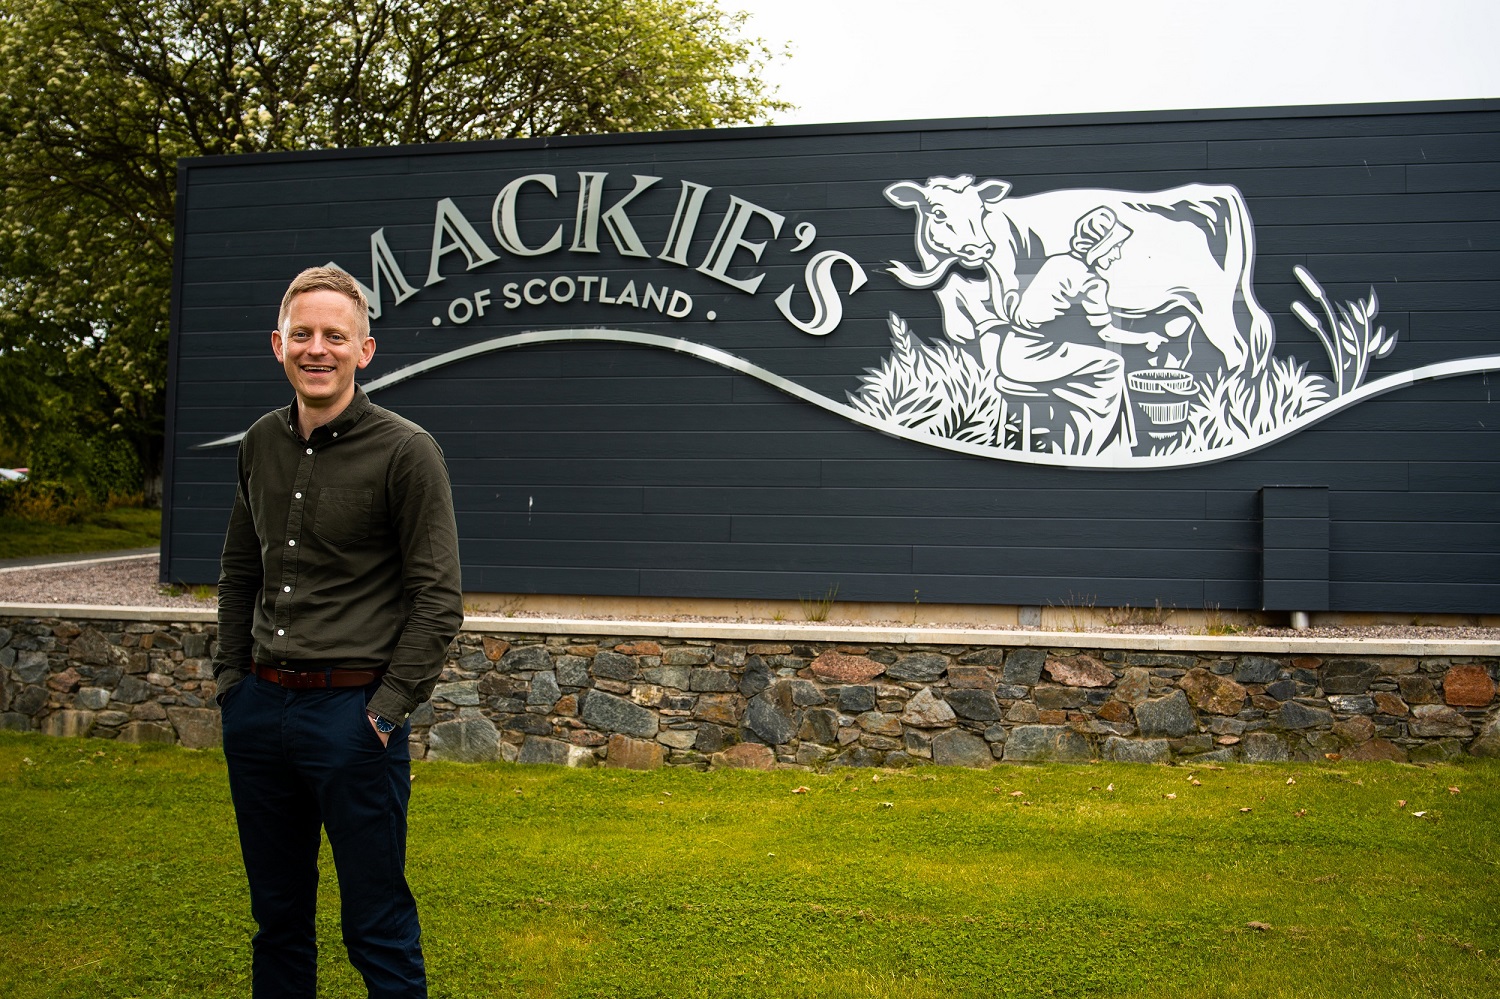 Mackie's has got it licked as exports rise 37%